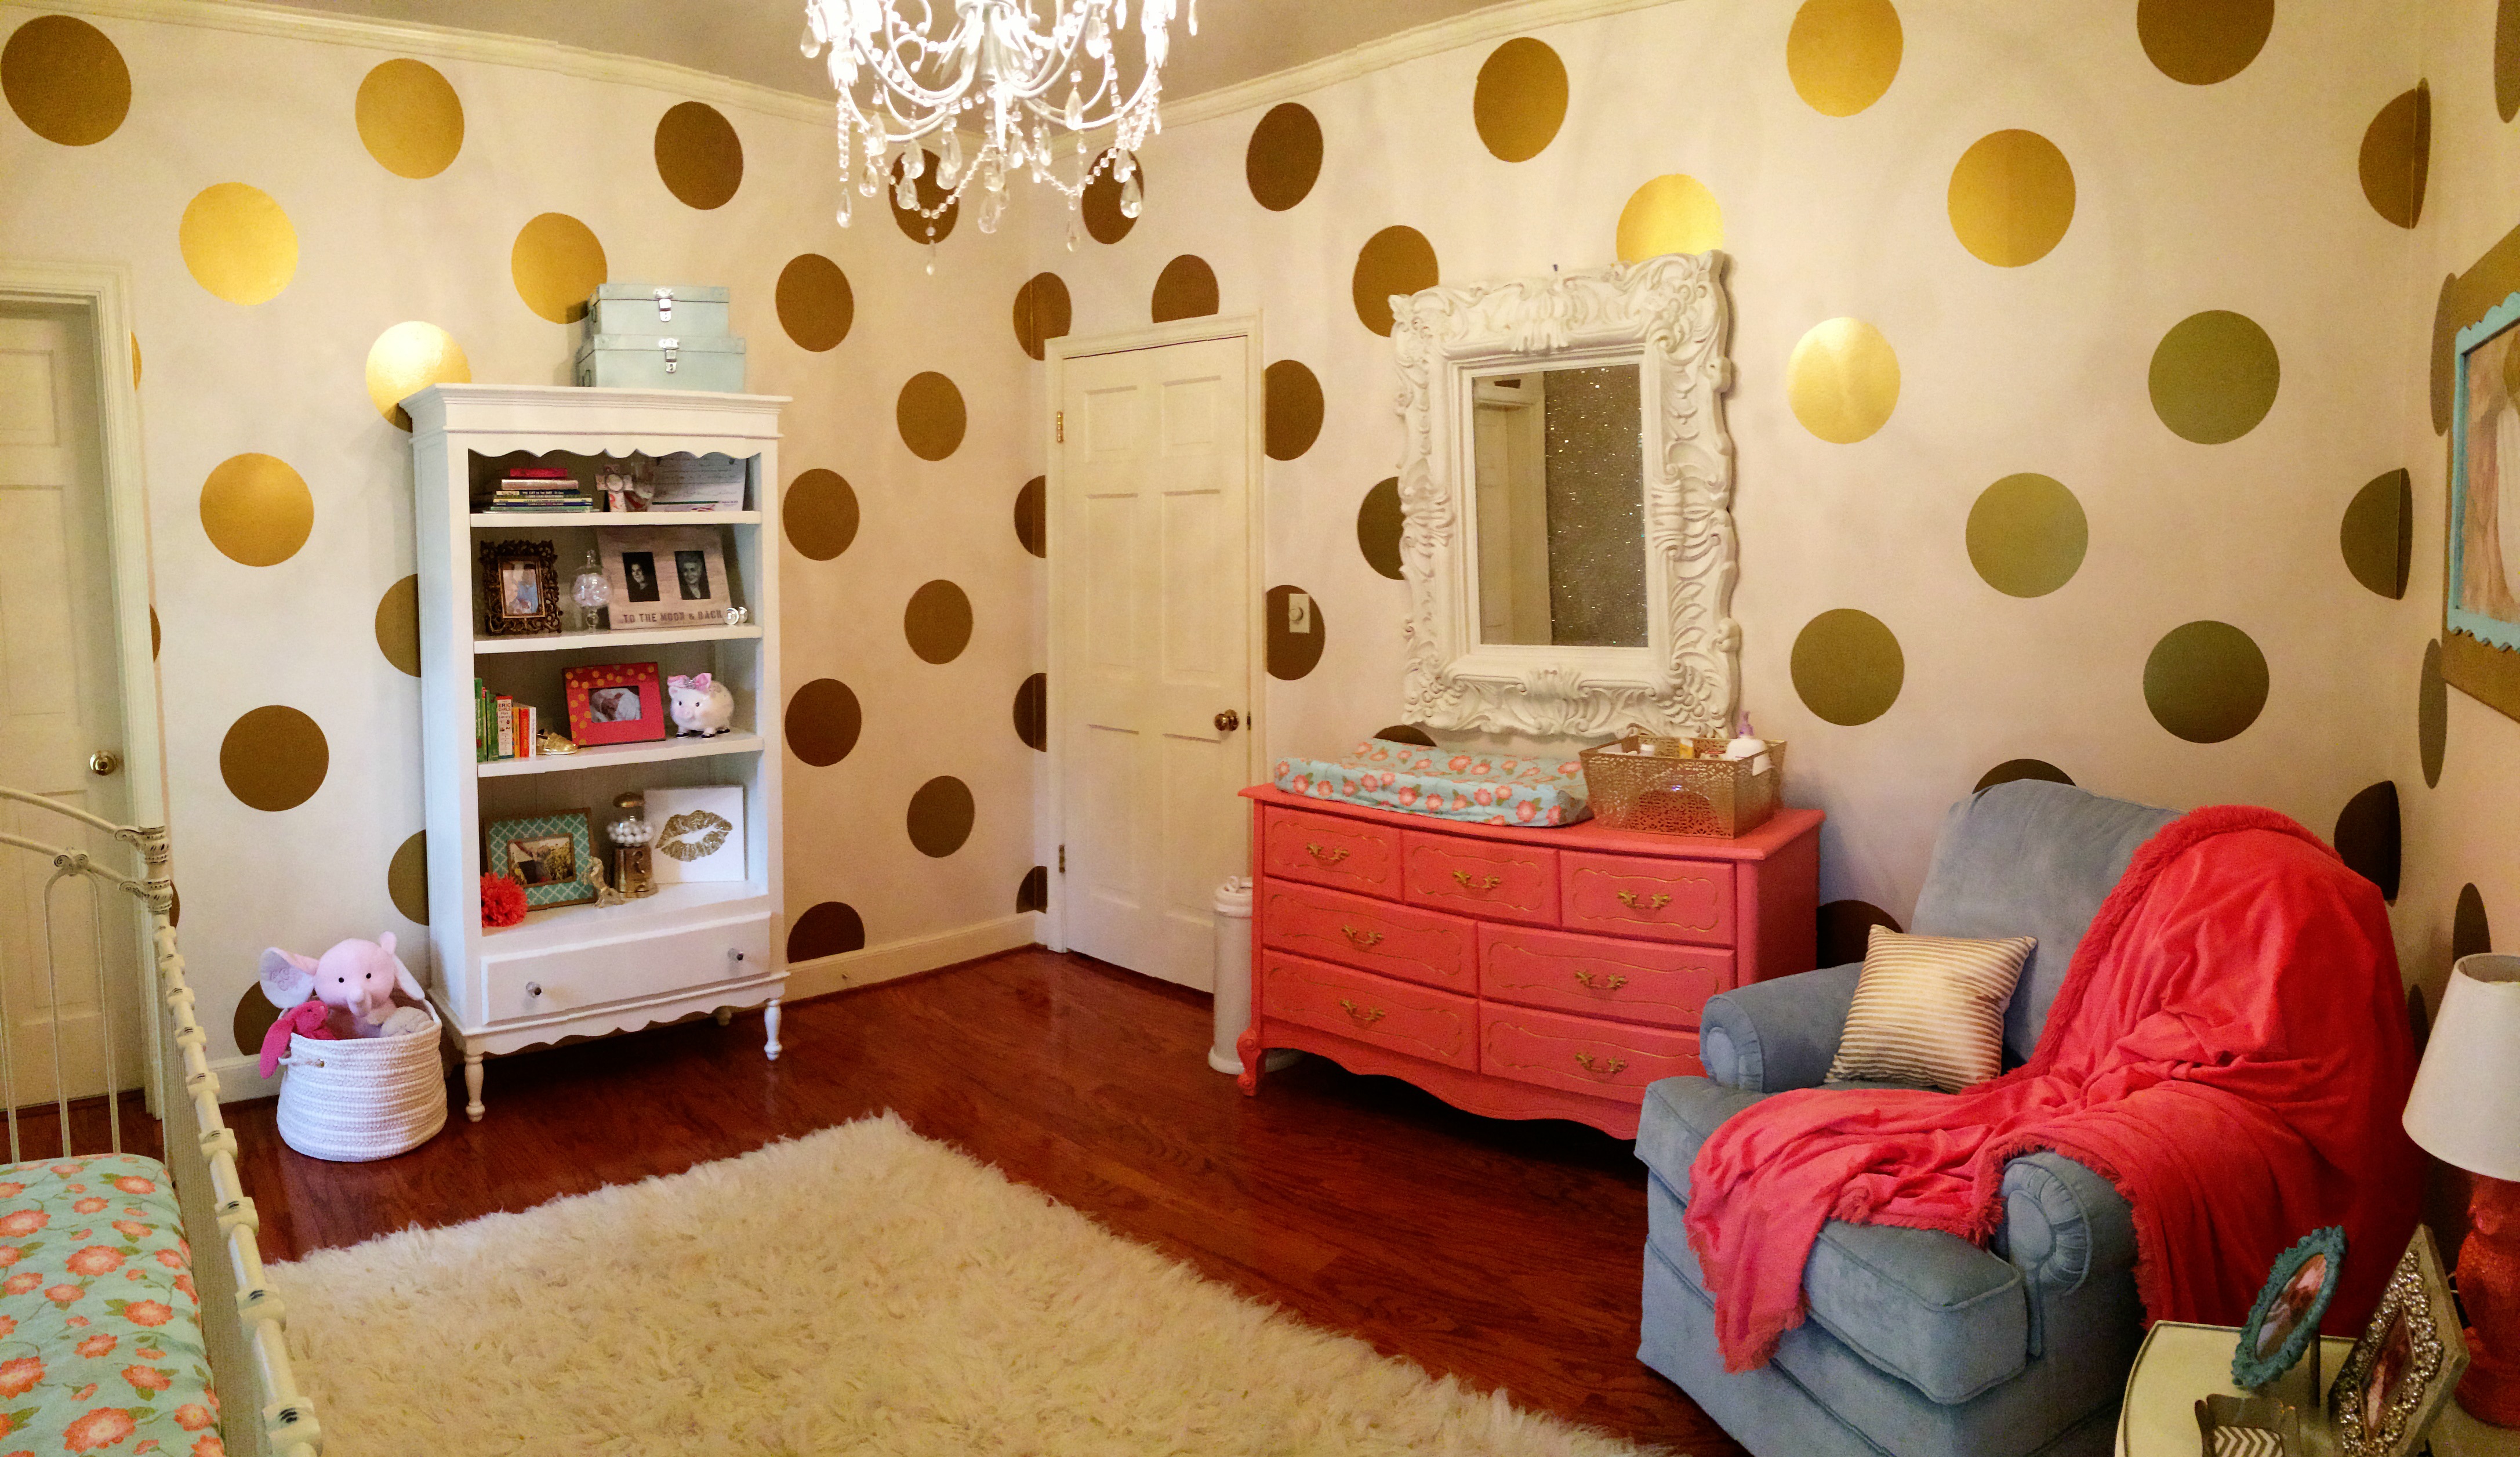 Gold Polka Dot Walls in this Coral and Gold Nursery